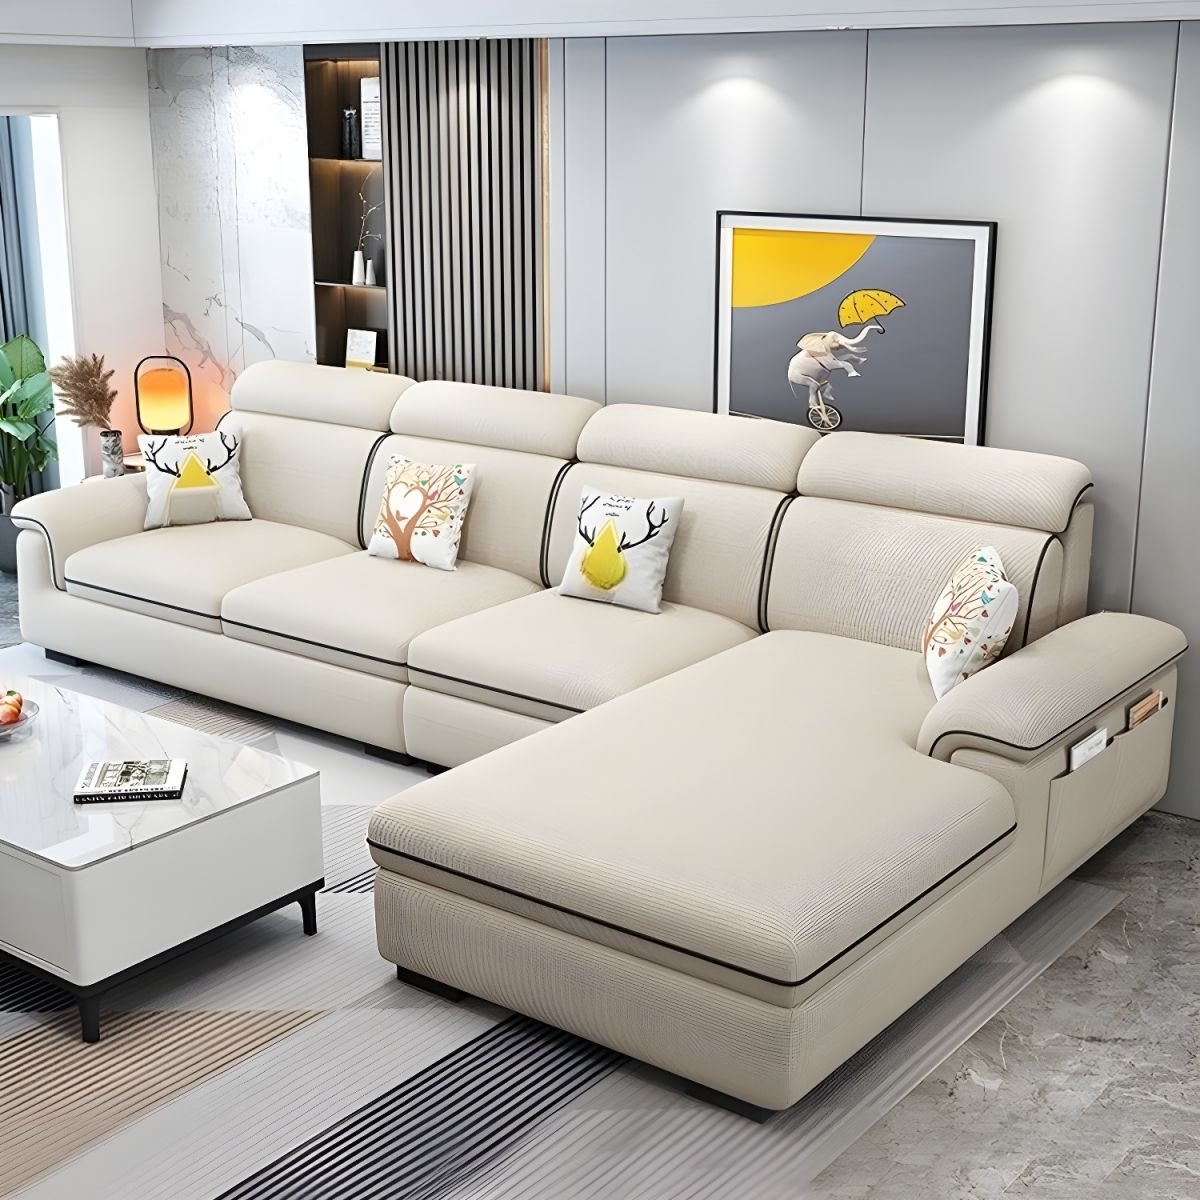 Wooden Modern 9 Feet L-Shape Sectionals No Distressing Seats 4 Storage Included Sofa Chaise - Linen Off-White Right